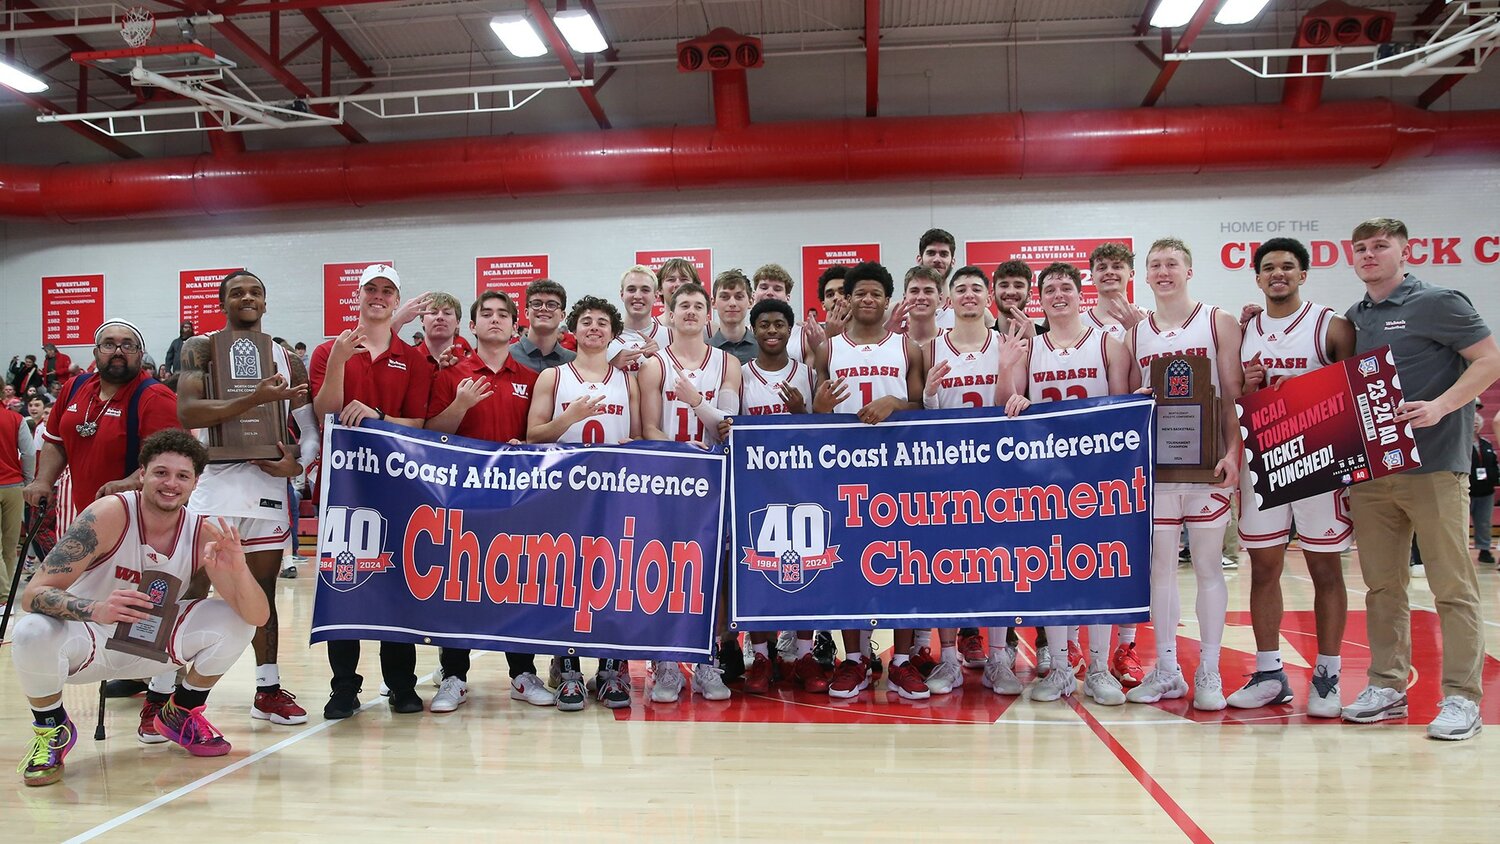 For the 3rd straight season Wabash College Men's Basketball are champions of the North Coast Athletic Conference and will play in the NCAA D3 Tournament. Wabash defeated Wooster 75-64.